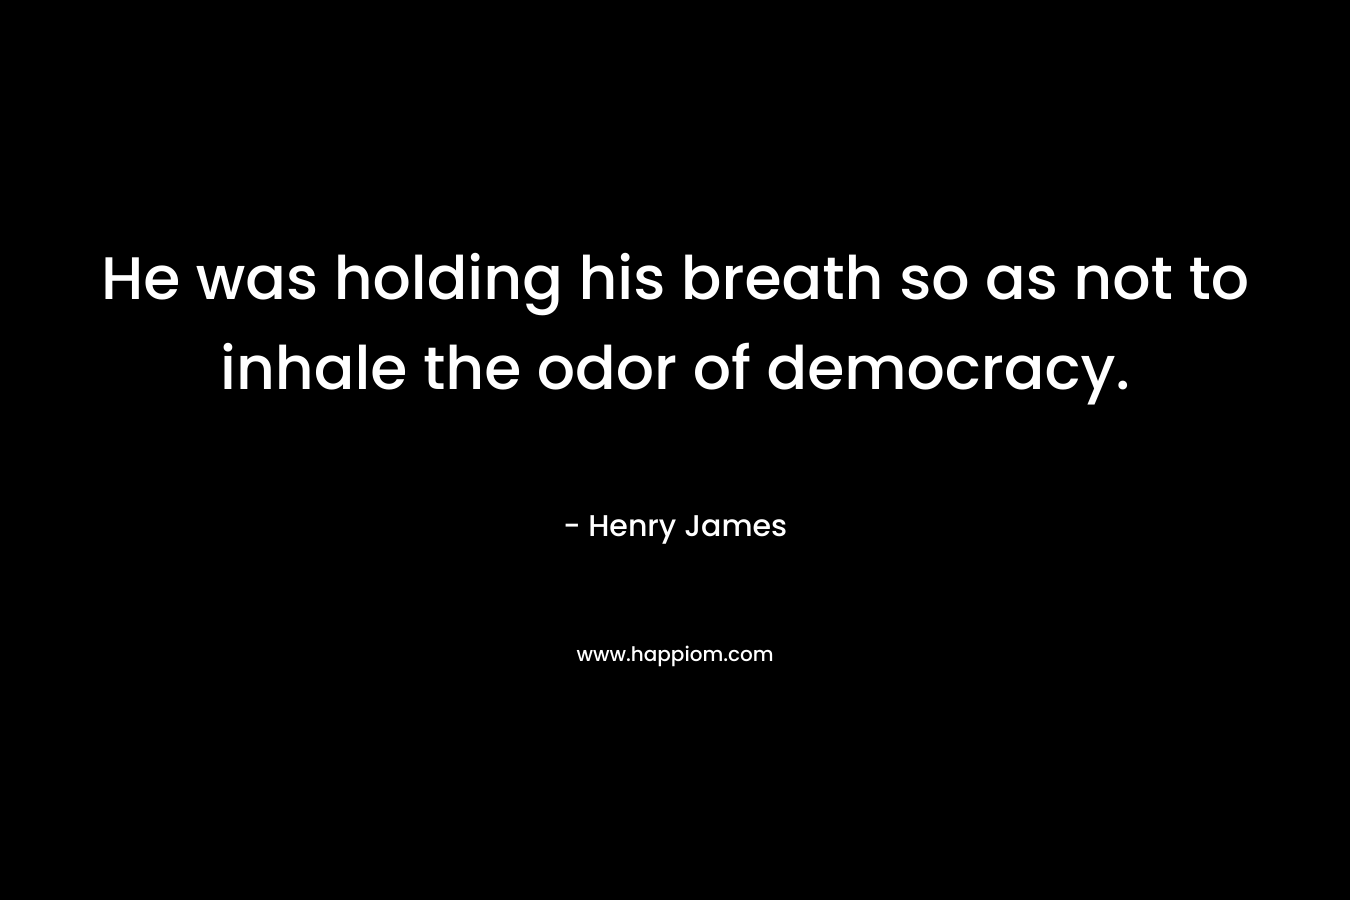 He was holding his breath so as not to inhale the odor of democracy.